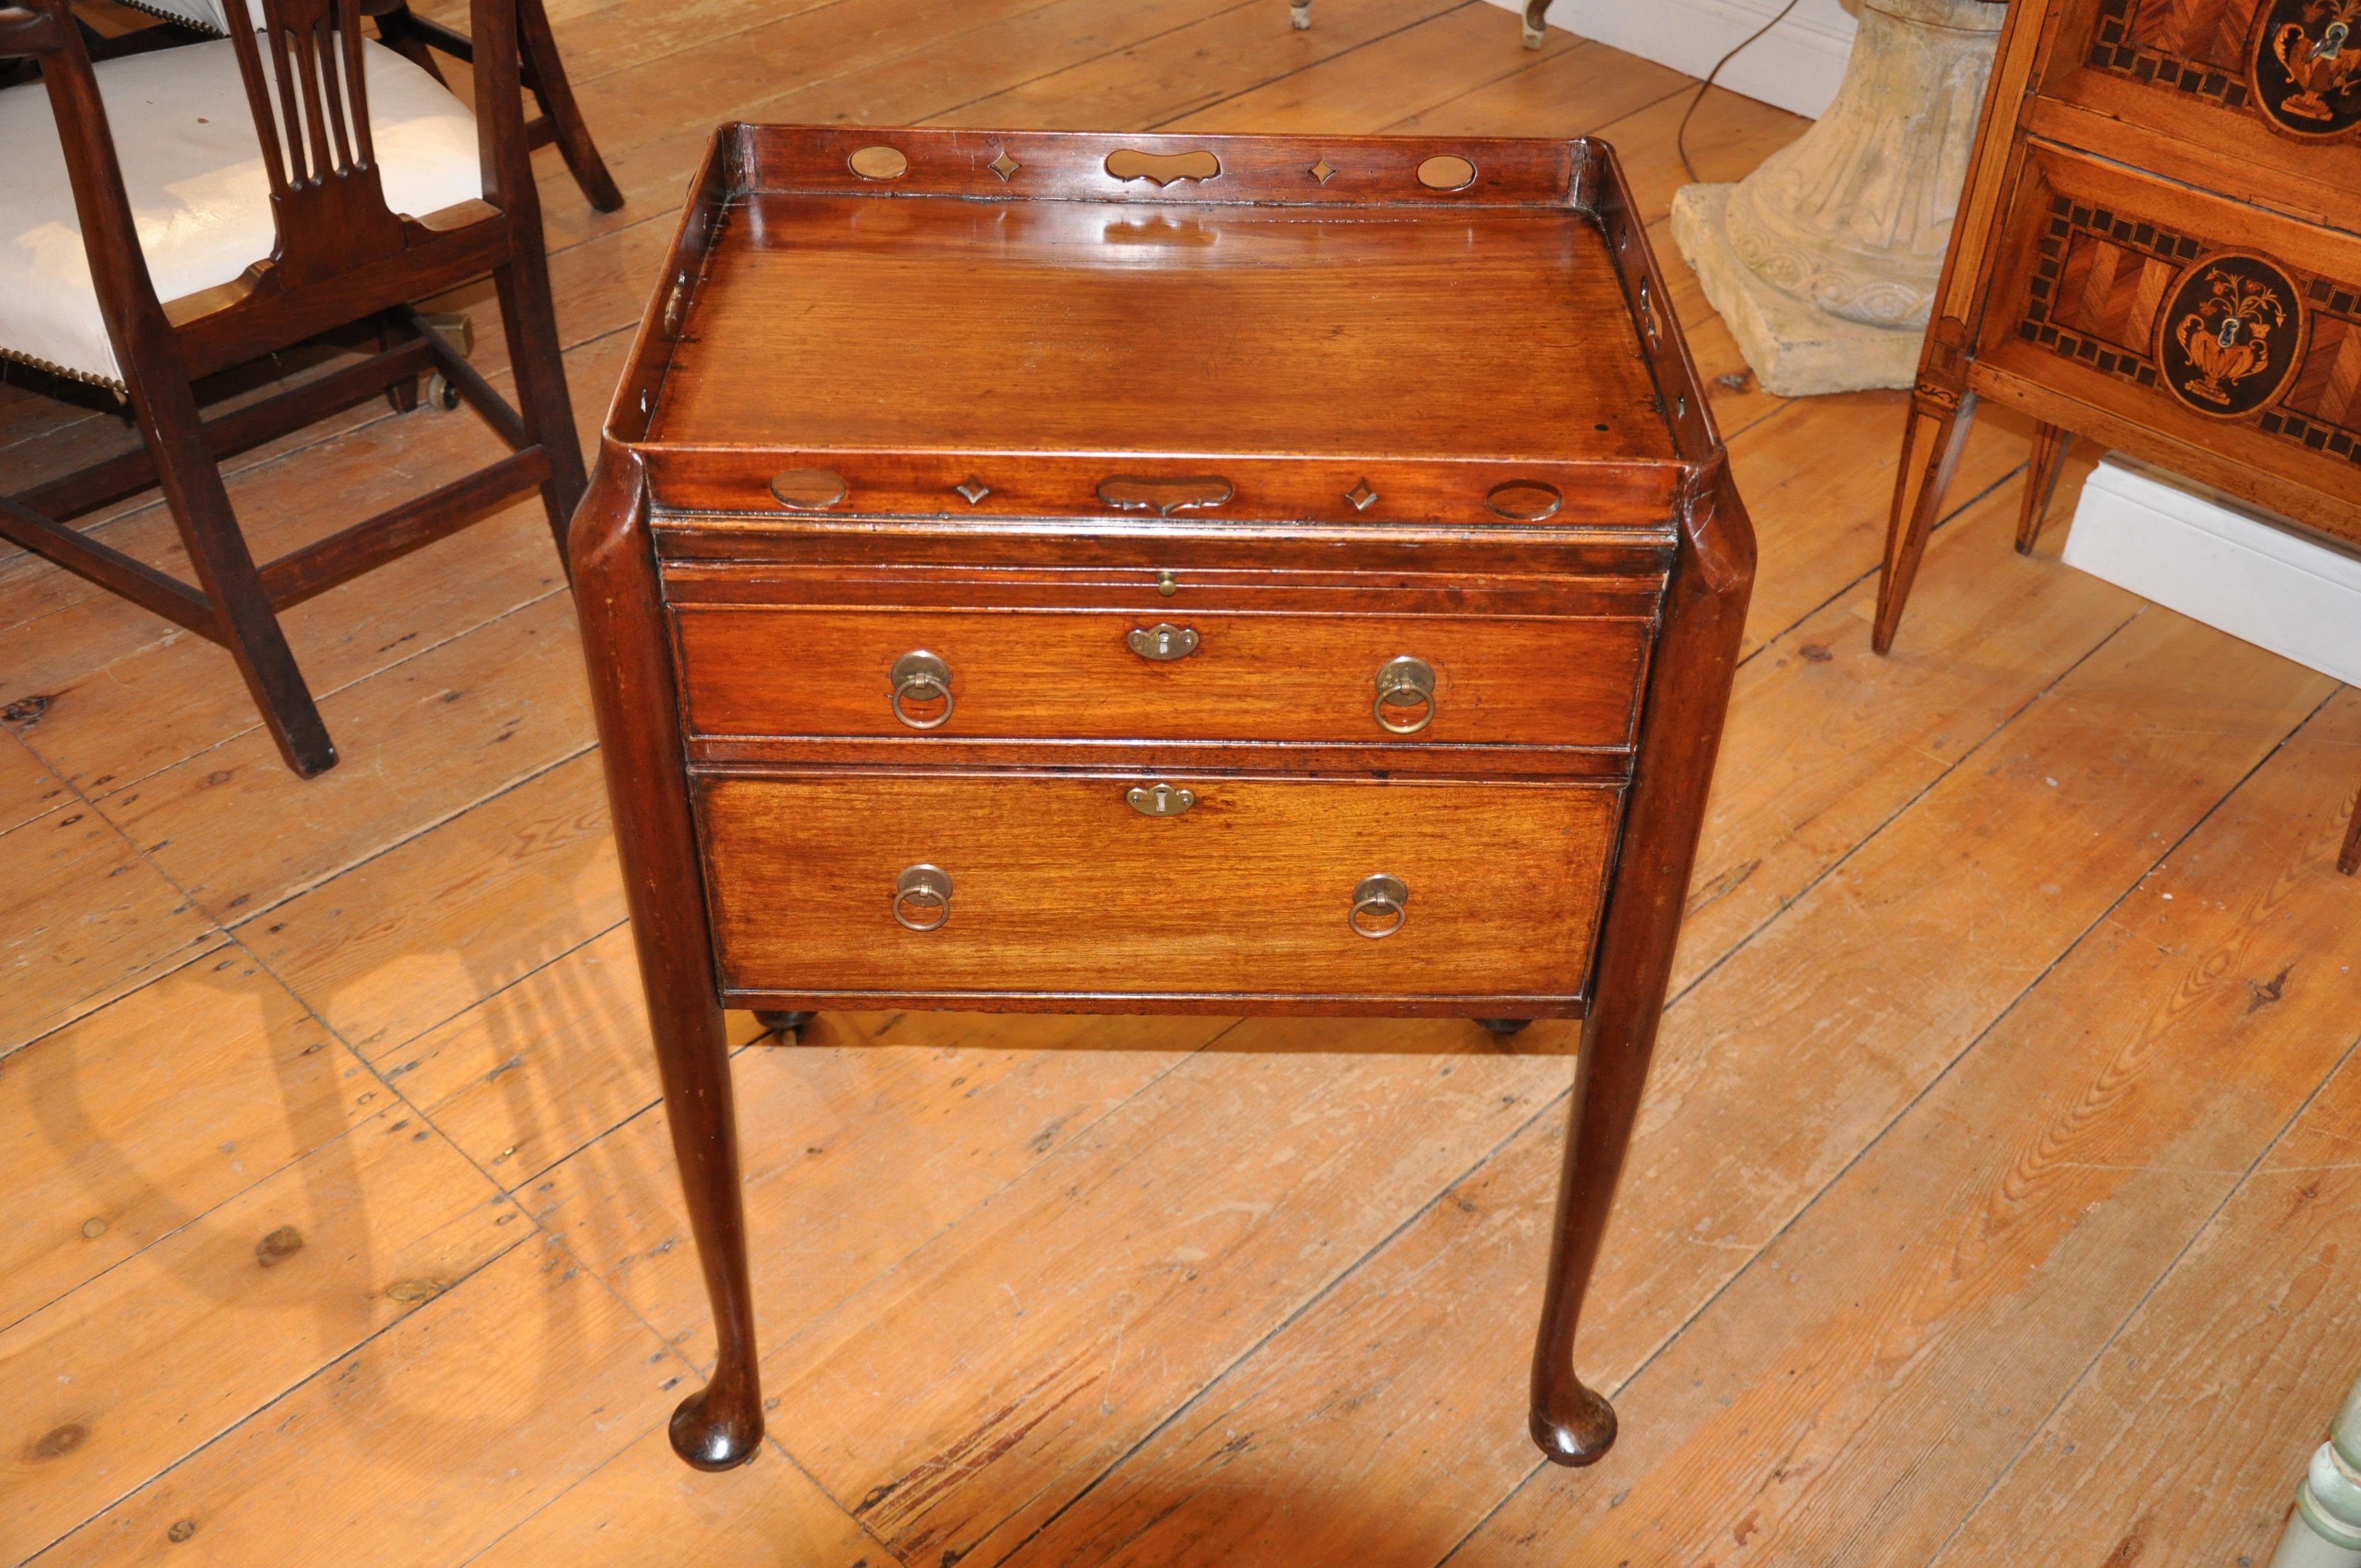 Period George II tray top chest or commode in walnut. Original handled gallery for carrying. Original brushing slide. Of the period 1740. Early formed legs. Drawers original. Only minor restoration. Would be carried to a gentleman for his morning